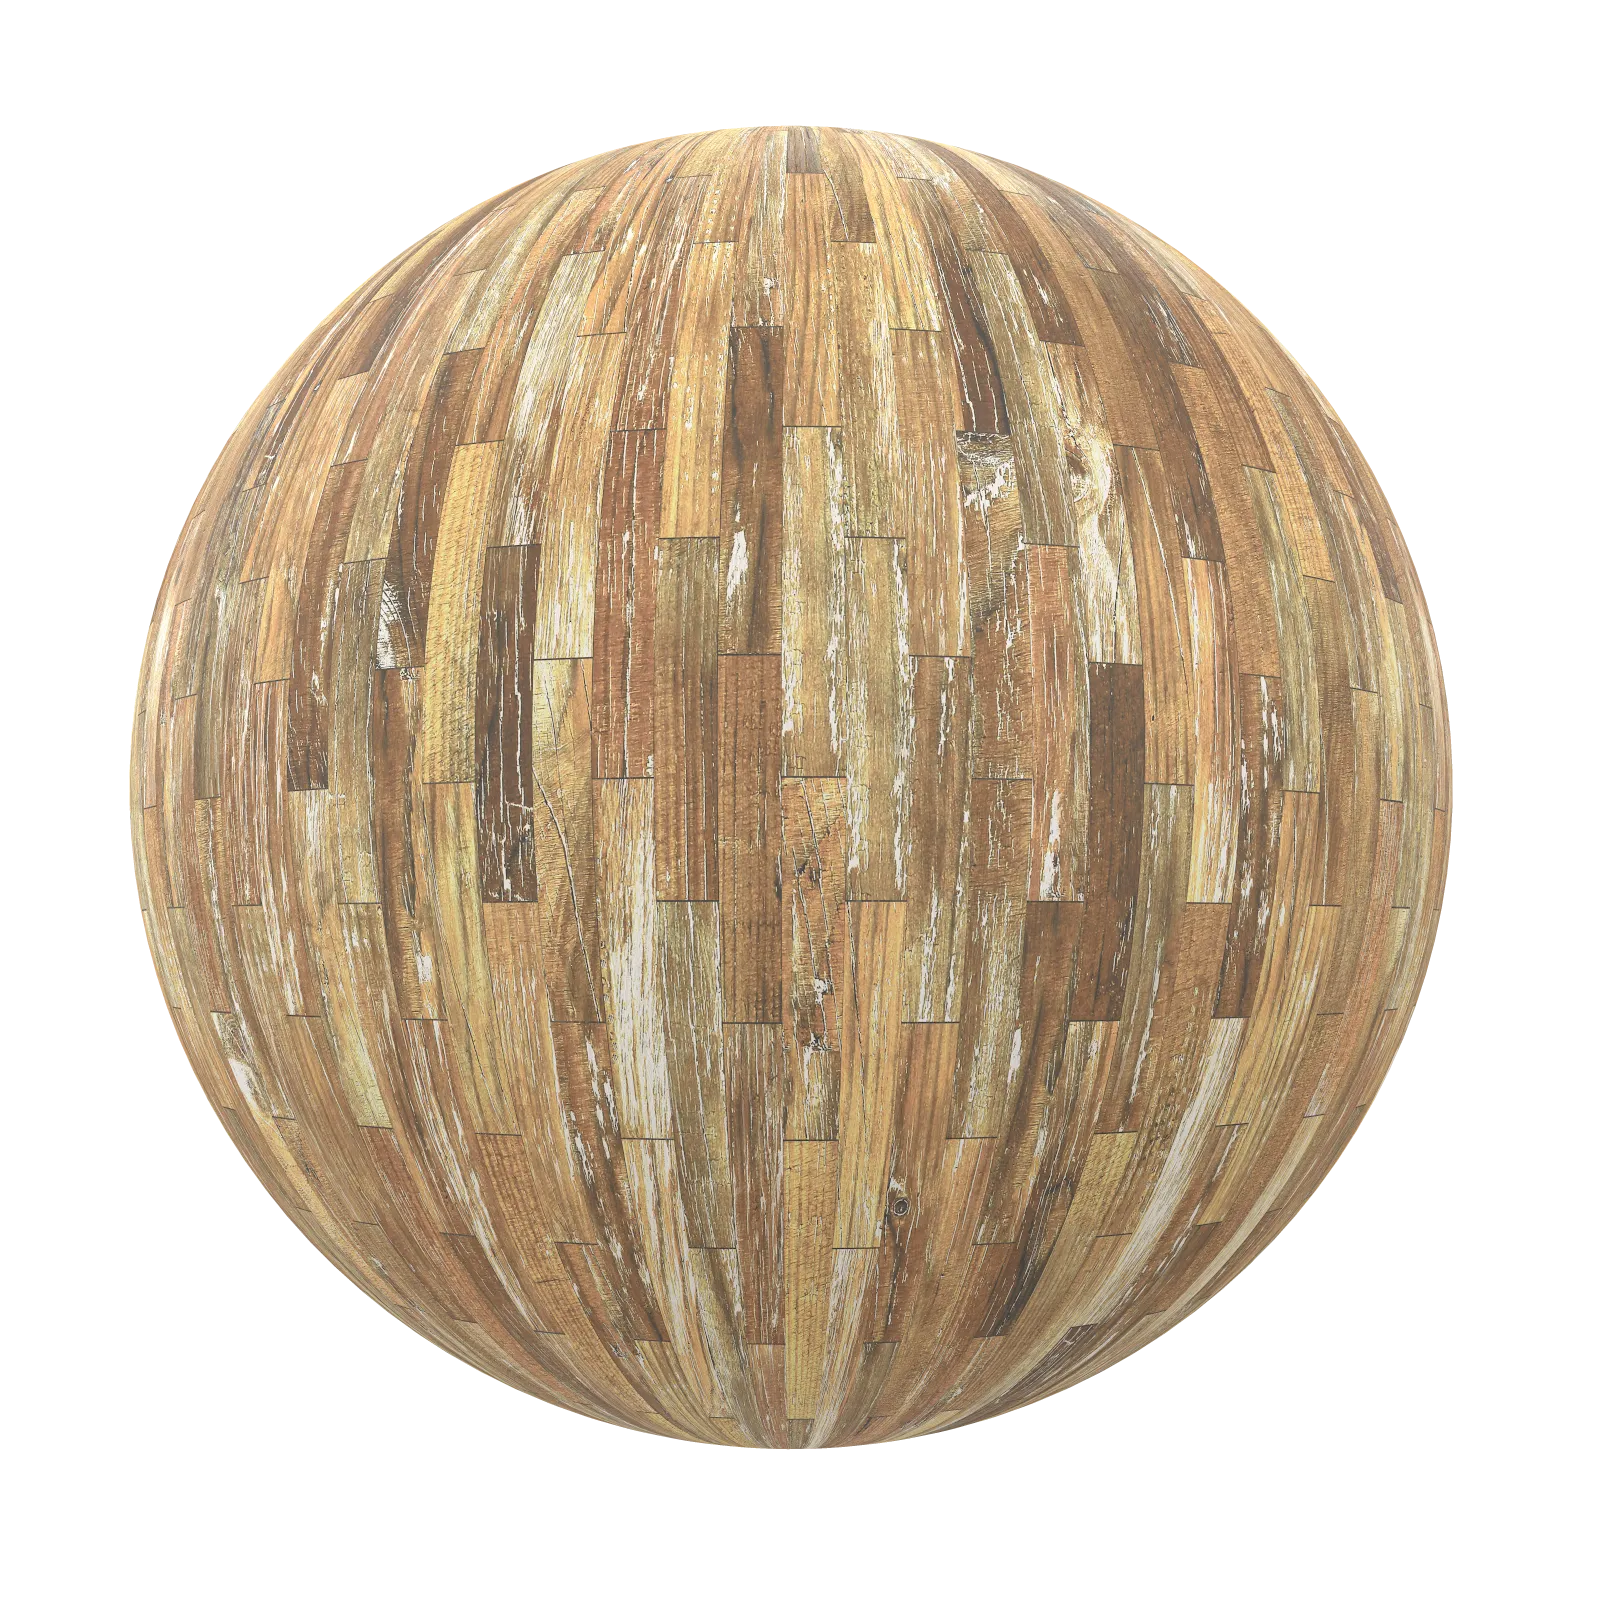 TEXTURES – WOOD – Old Wood Tiles 3